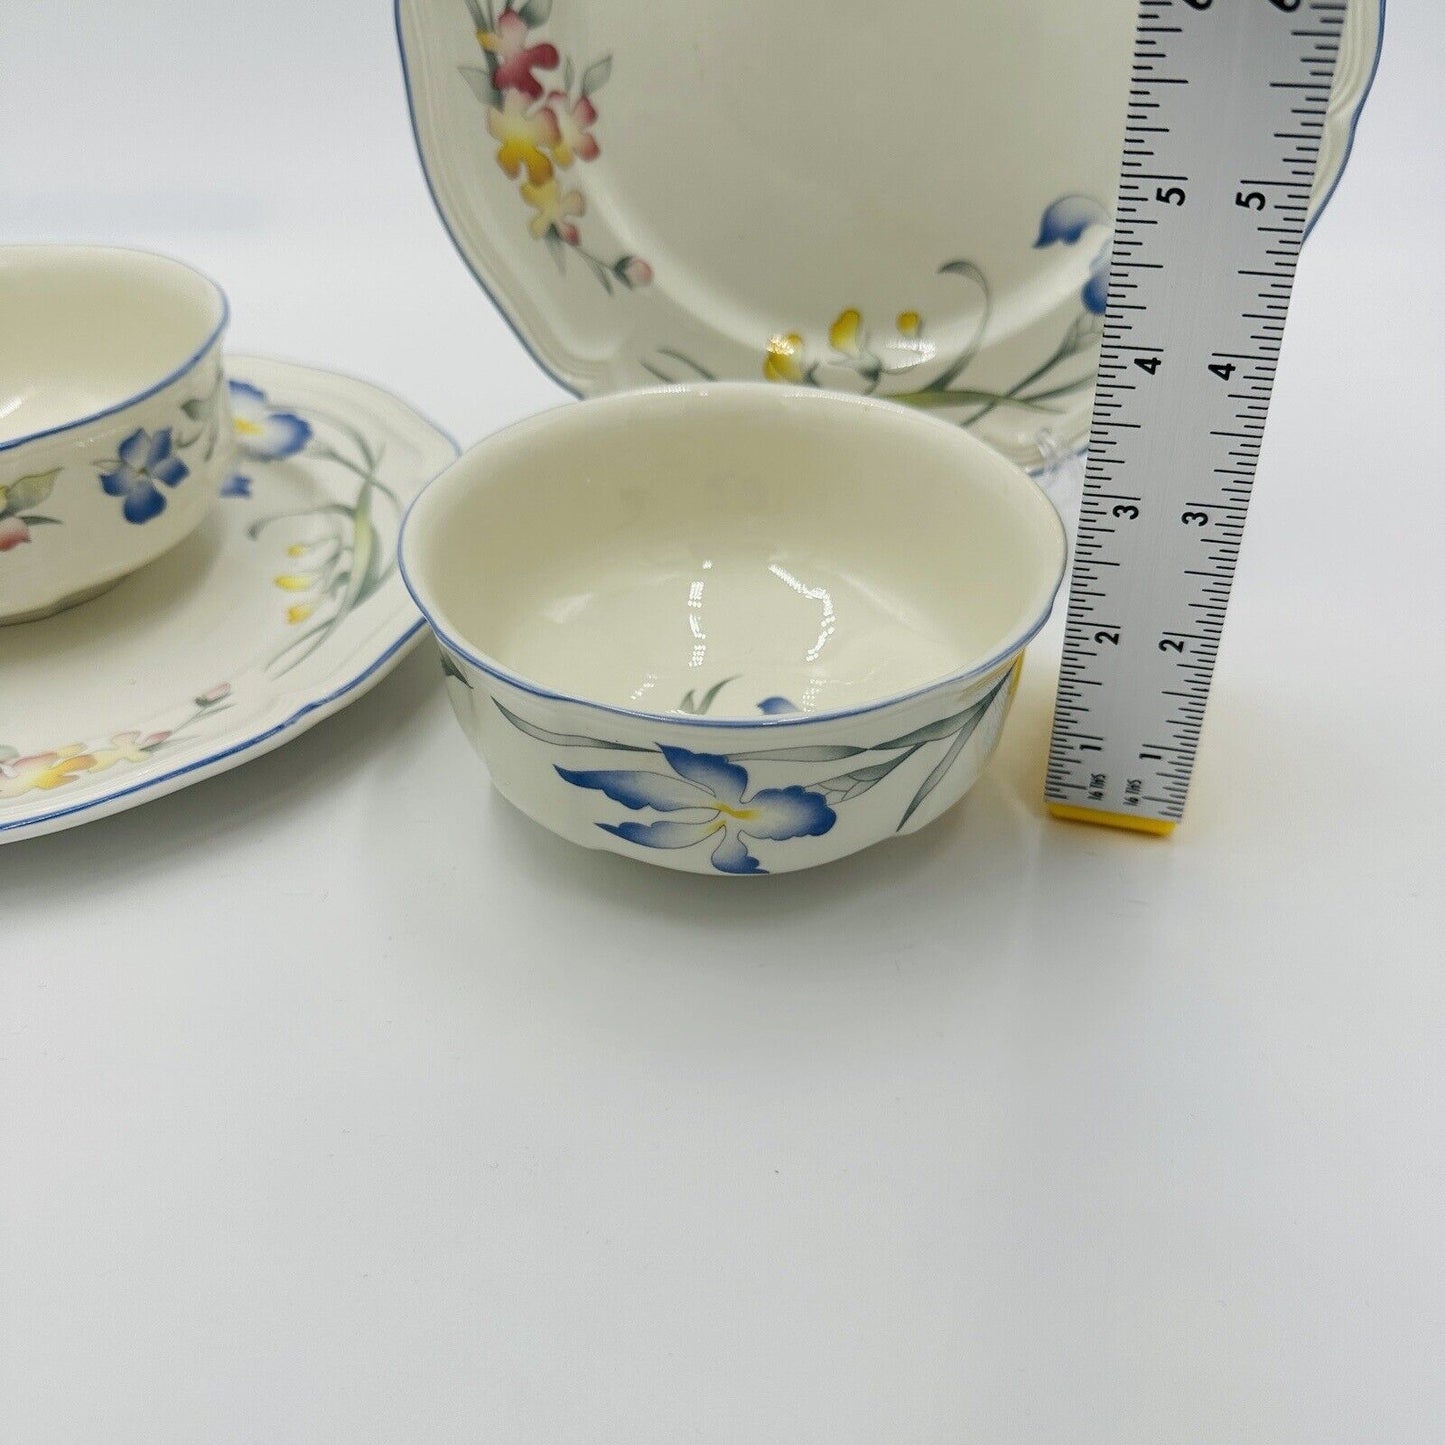 Villeroy & Boch Riviera Bowl and Dish Dinnerware Porcelain Luxembourg Set Serve